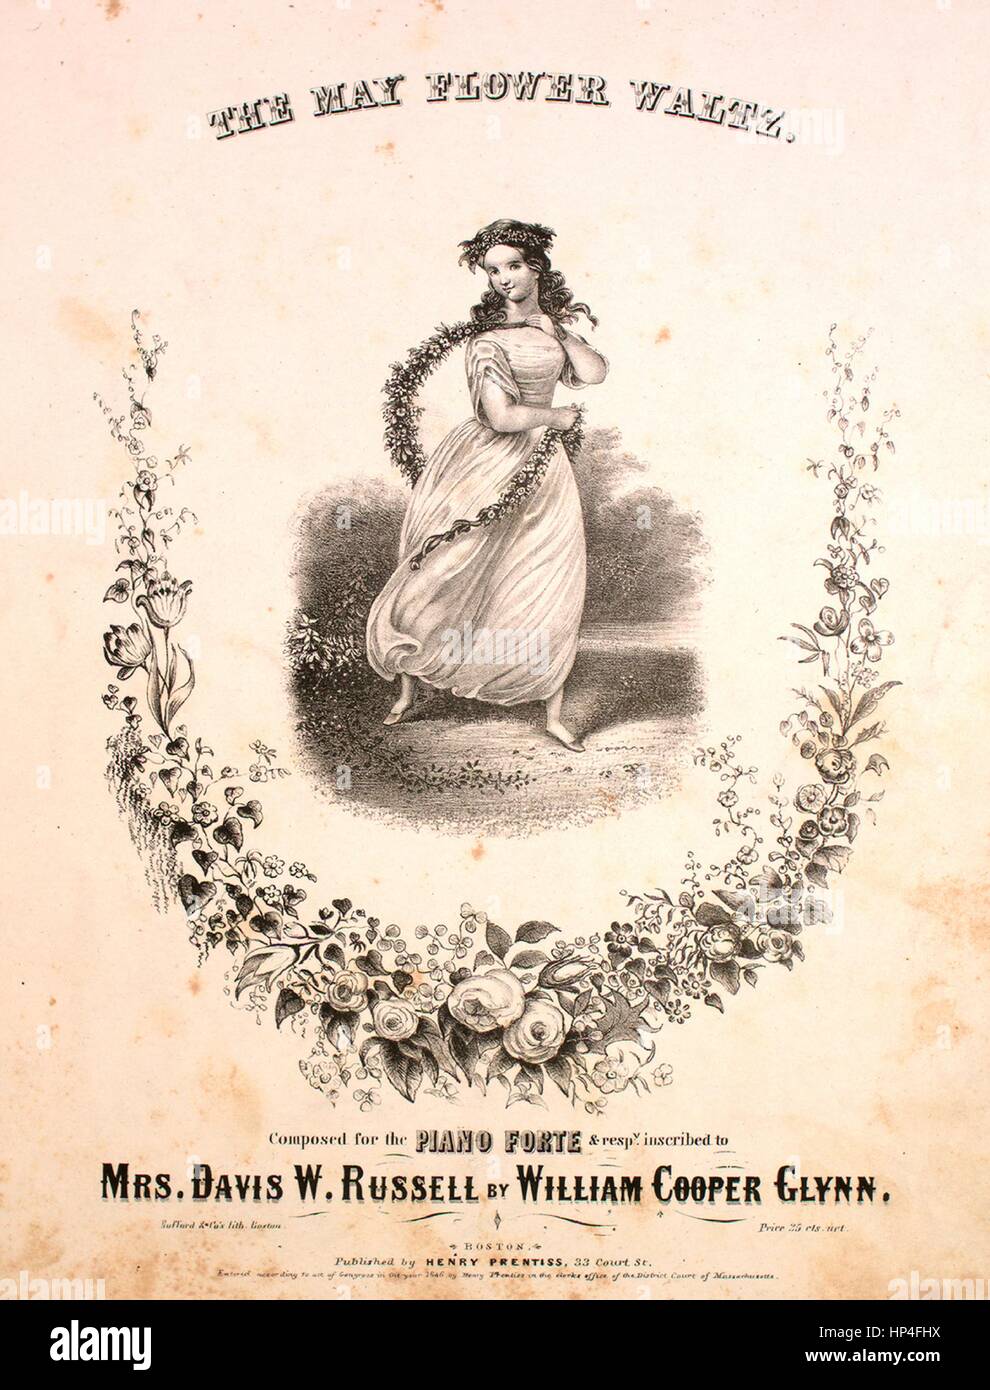 Sheet music cover image of the song 'The May Flower Waltz', with original authorship notes reading 'Composed for the Piano Forte by William Cooper Glynn', United States, 1846. The publisher is listed as 'Henry Prentiss, No. 33 Court St.', the form of composition is 'sectional', the instrumentation is 'piano', the first line reads 'None', and the illustration artist is listed as 'Bufford and Co.'s lith. Boston'. Stock Photo